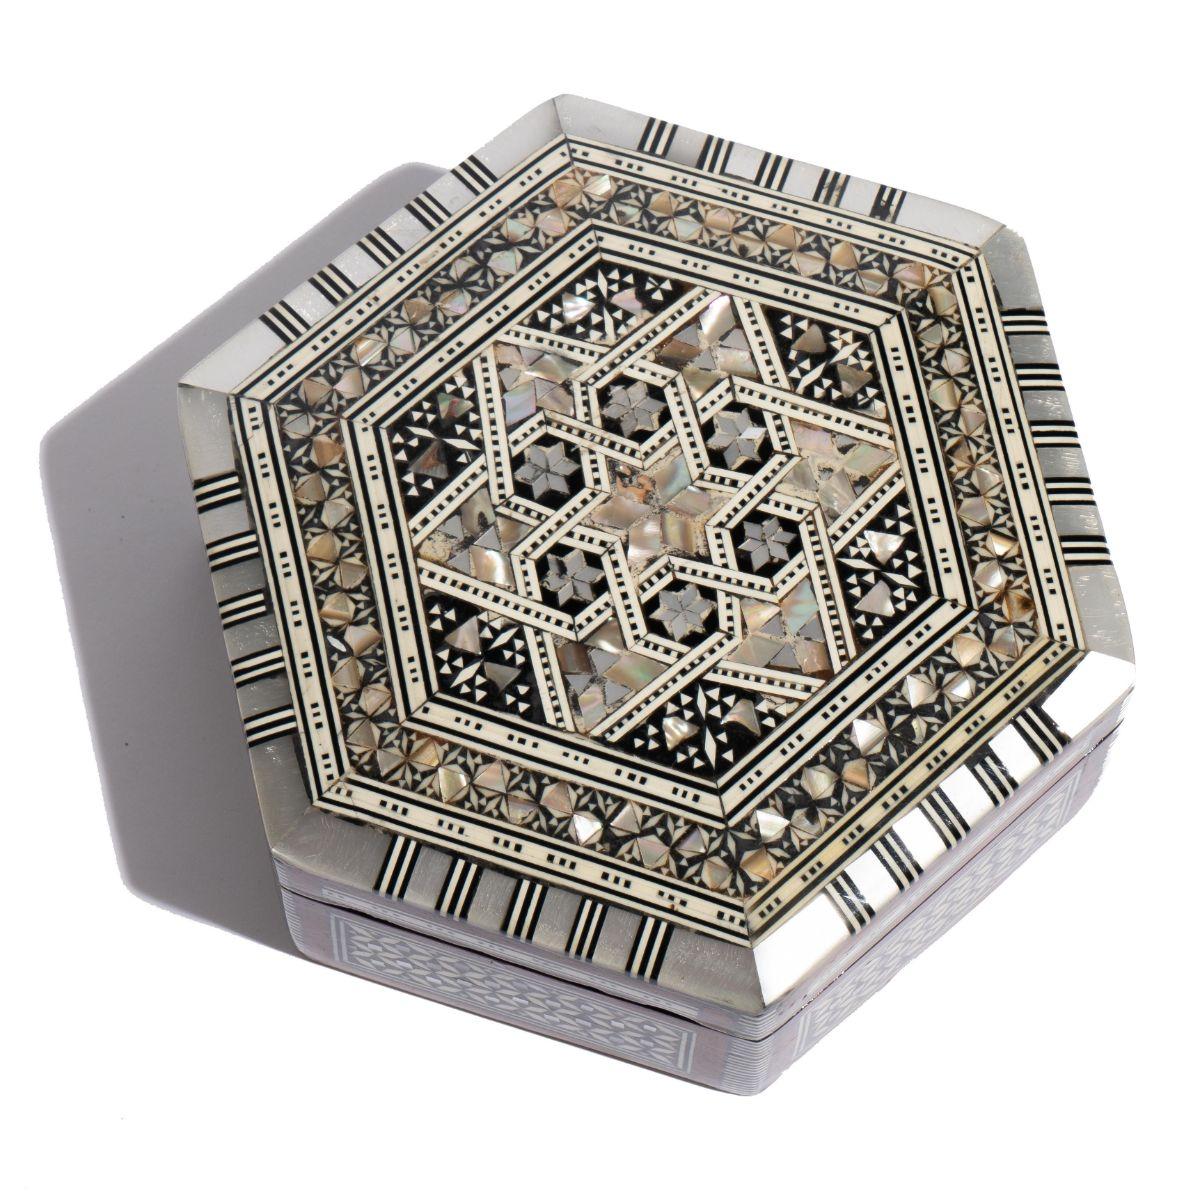 Hexagonal hardwood hinged lid box with mother of pearl, ebony, and abalone inlay centering on a six pointed star defined by stringing, patterned inlay, and banding.